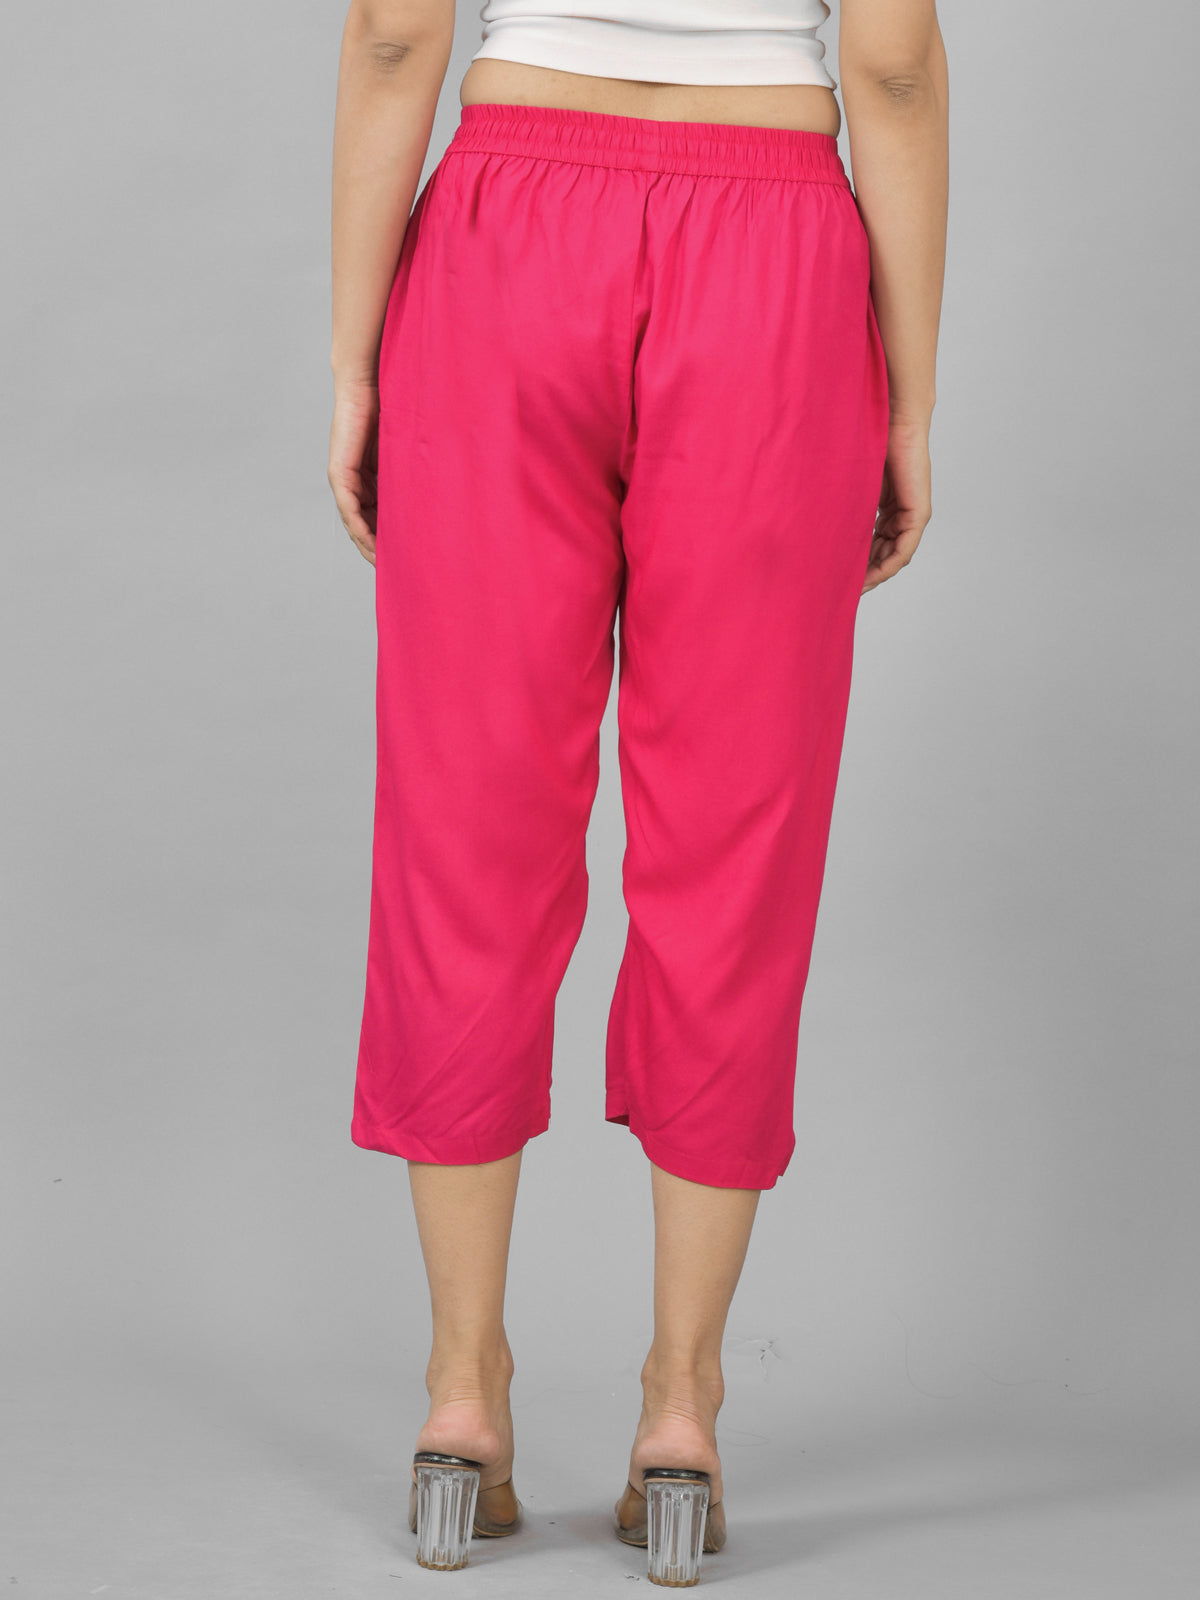 Pack Of 2 Women Rani Pink And Teal Blue Calf Length Rayon Culottes Trouser Combo